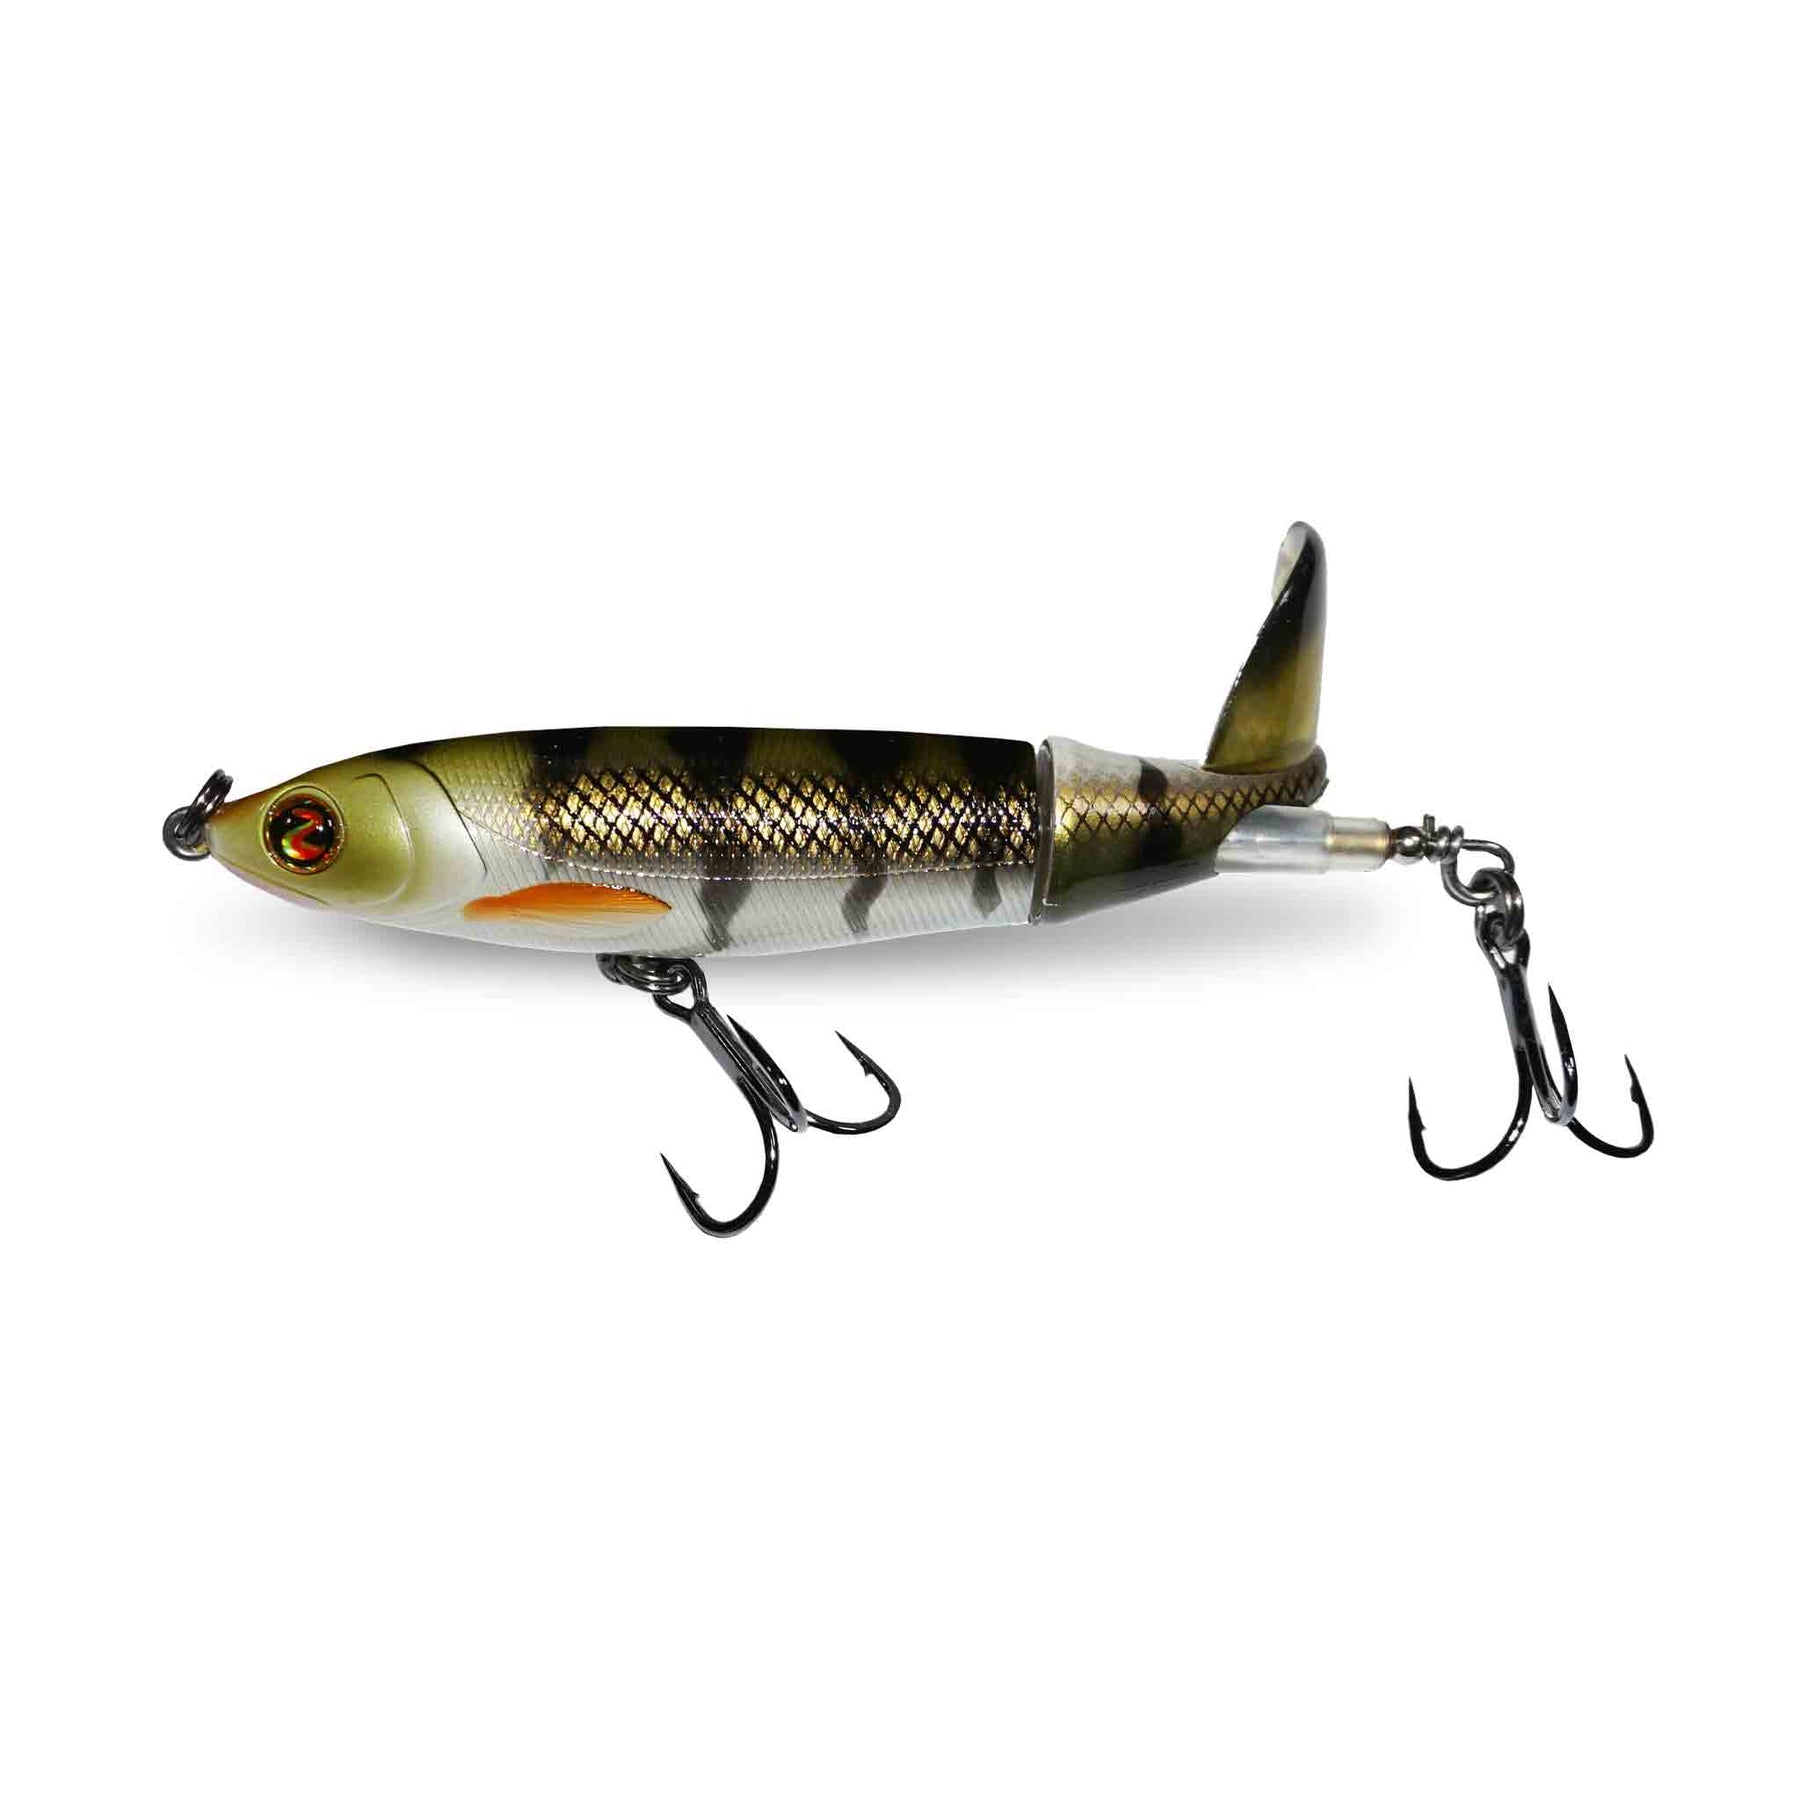 View of Topwater River2Sea Whopper Plopper 130 5" Prop Bait Perch available at EZOKO Pike and Musky Shop